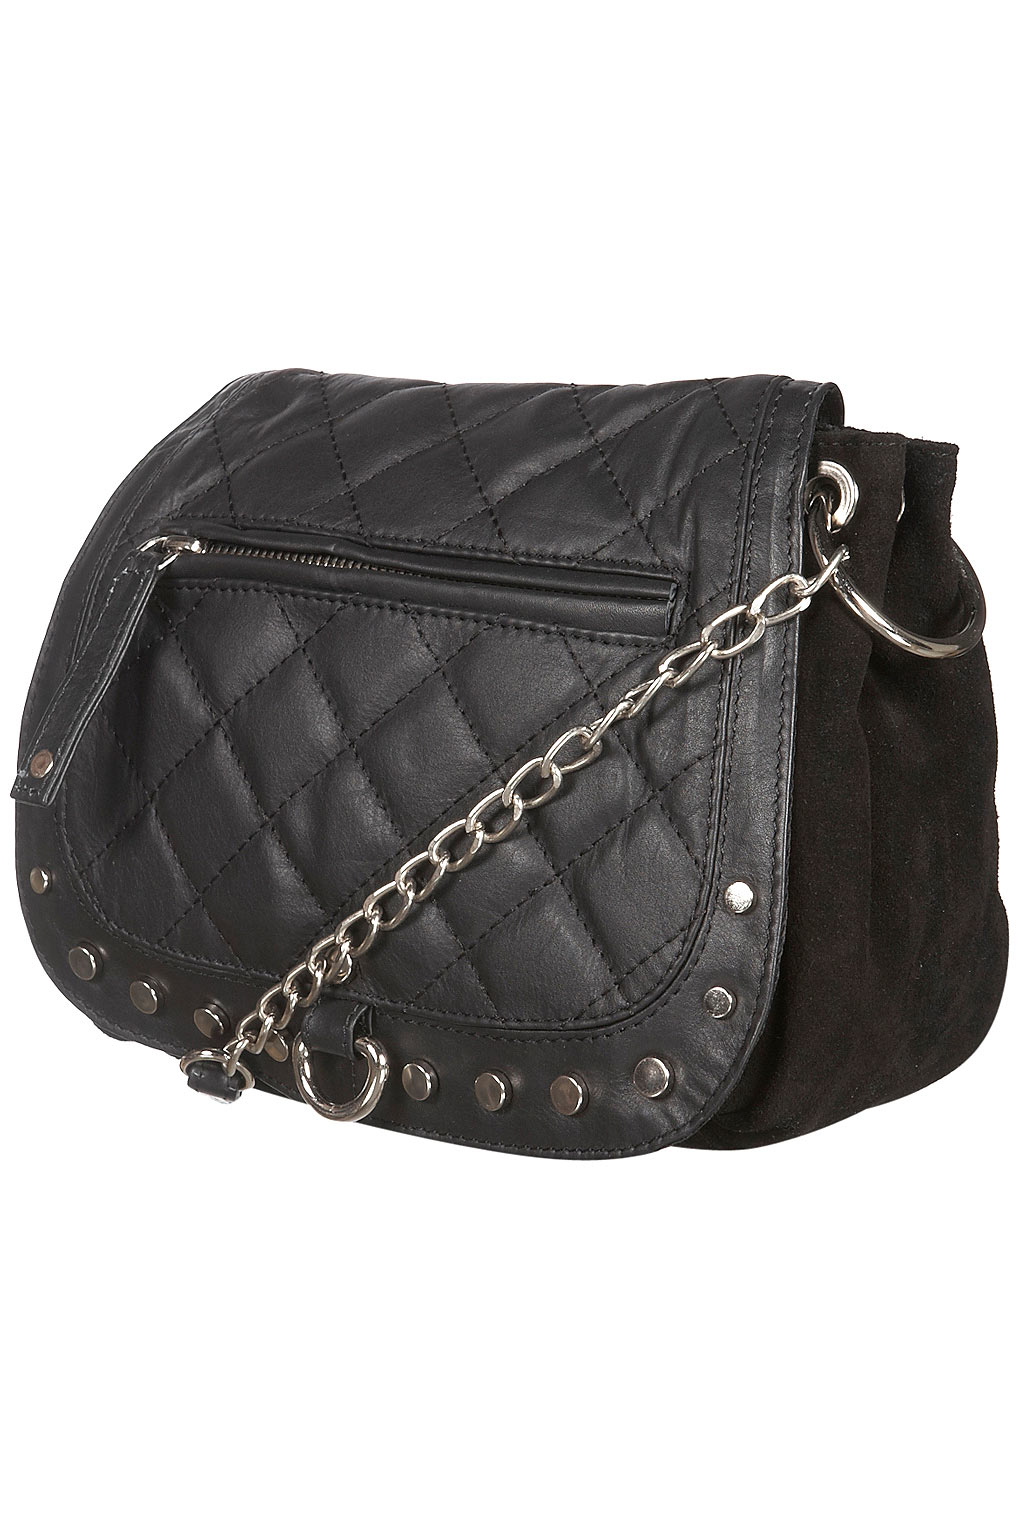 Topshop Quilted Cross Body Bag in Black